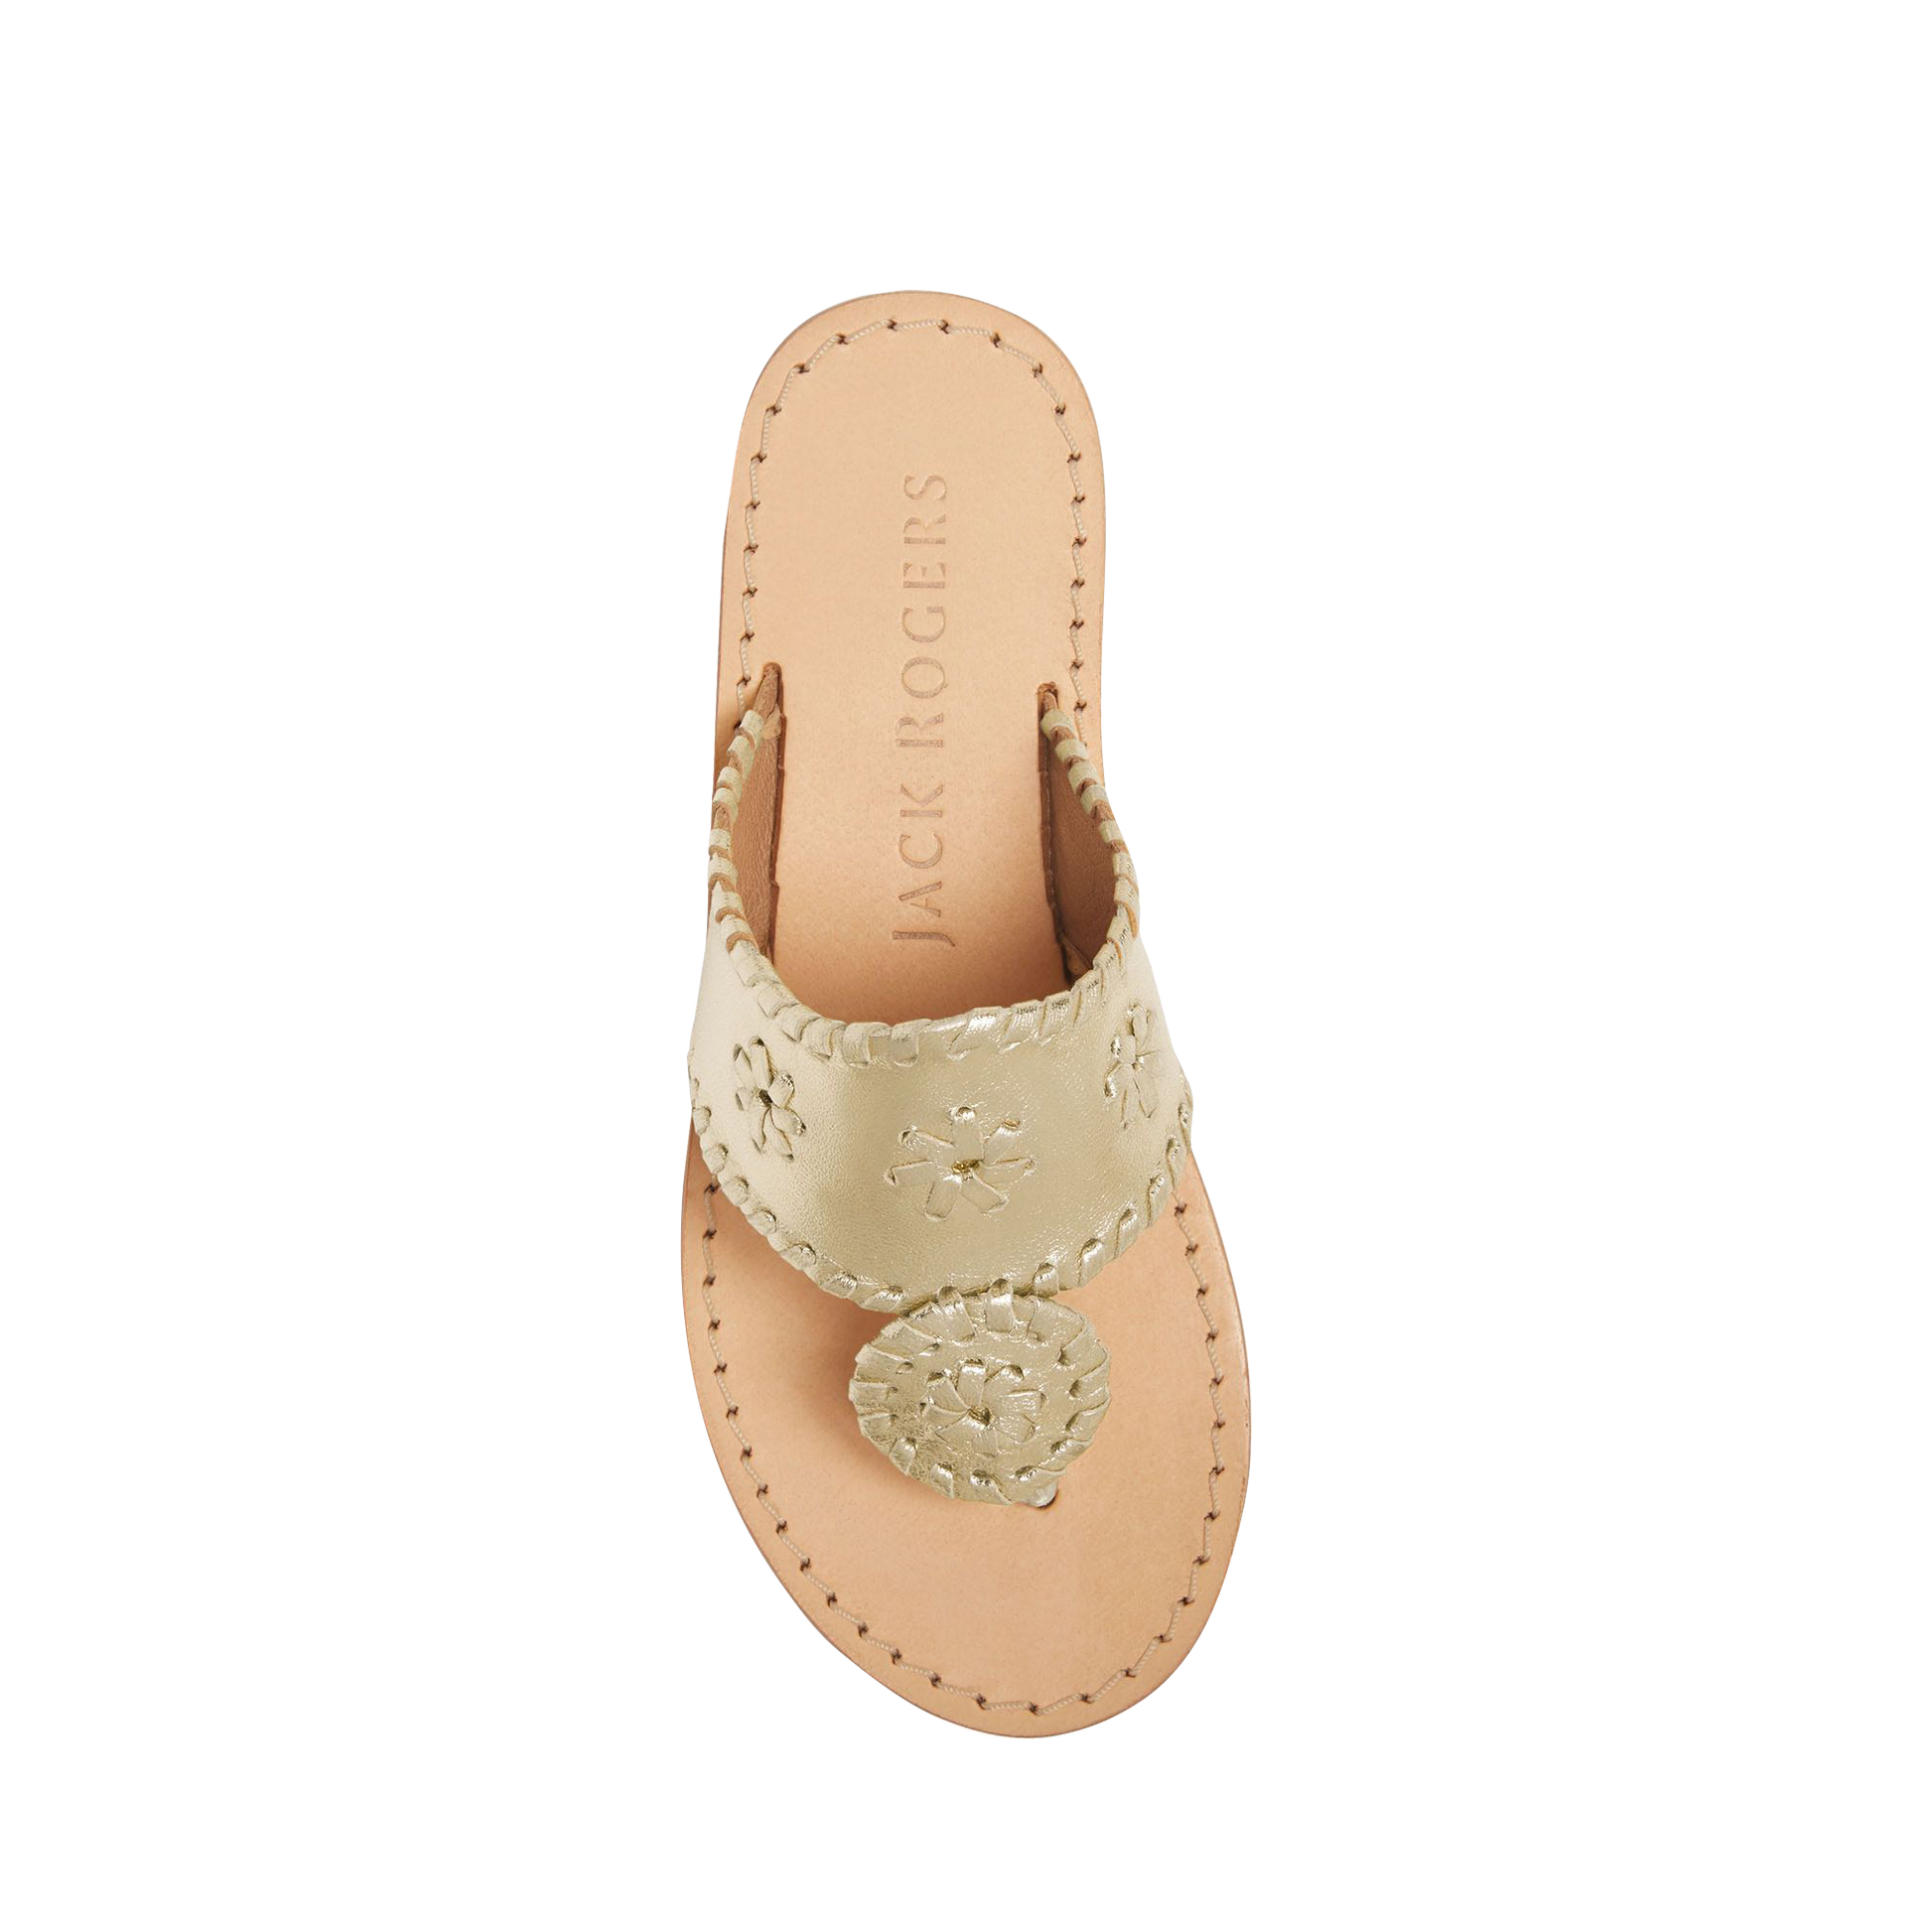 Jacks for your little fashionista! Our Girls Jacks Flat sandal features a leather upper with our signature rondelles and whipstitching. Designed with a gum rubber sole for elements of stability and grip, your mini-me will look adorable in this style.  1" Heel Height Leather Upper Leather Lining Rubber Sole